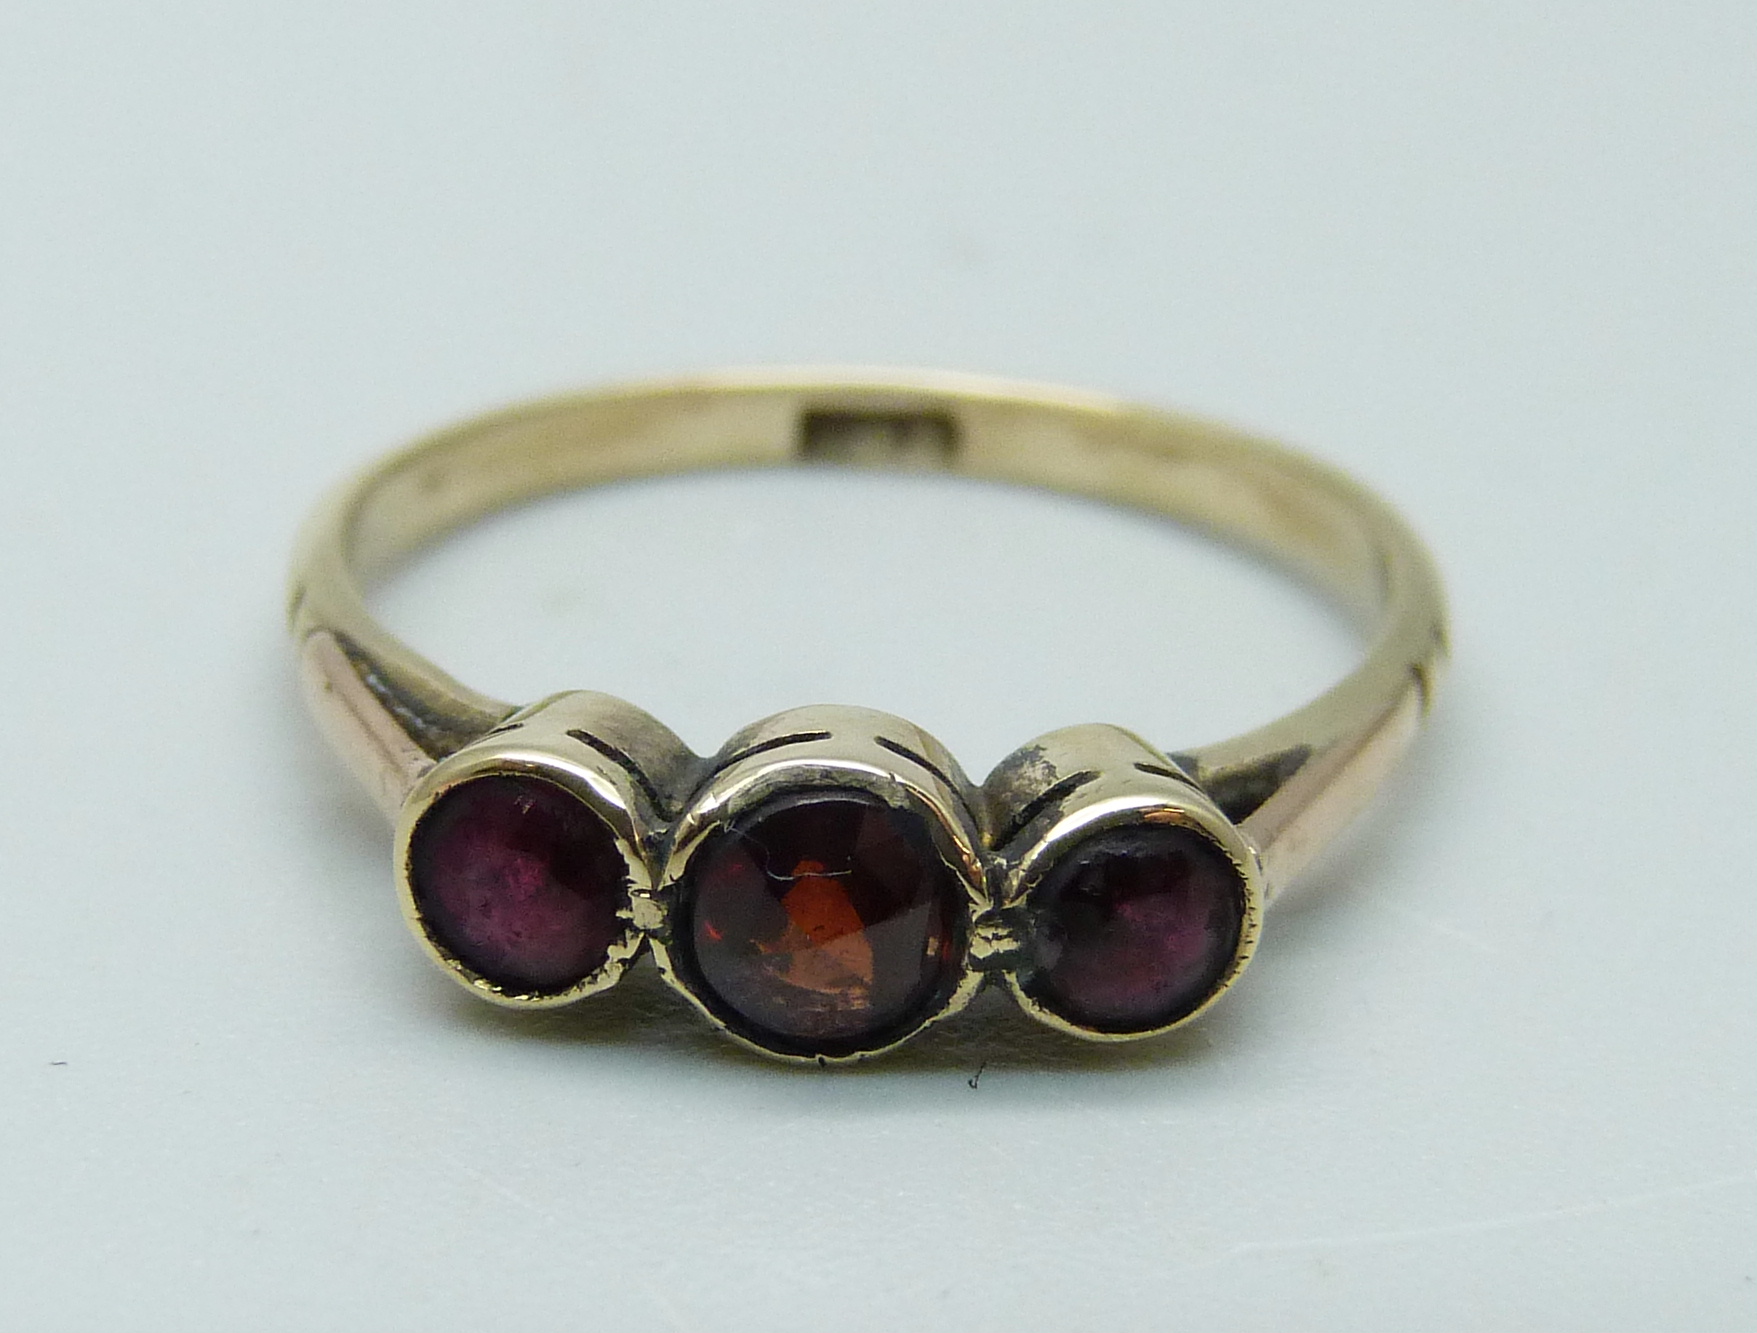 A 9ct gold and garnet trilogy ring, N